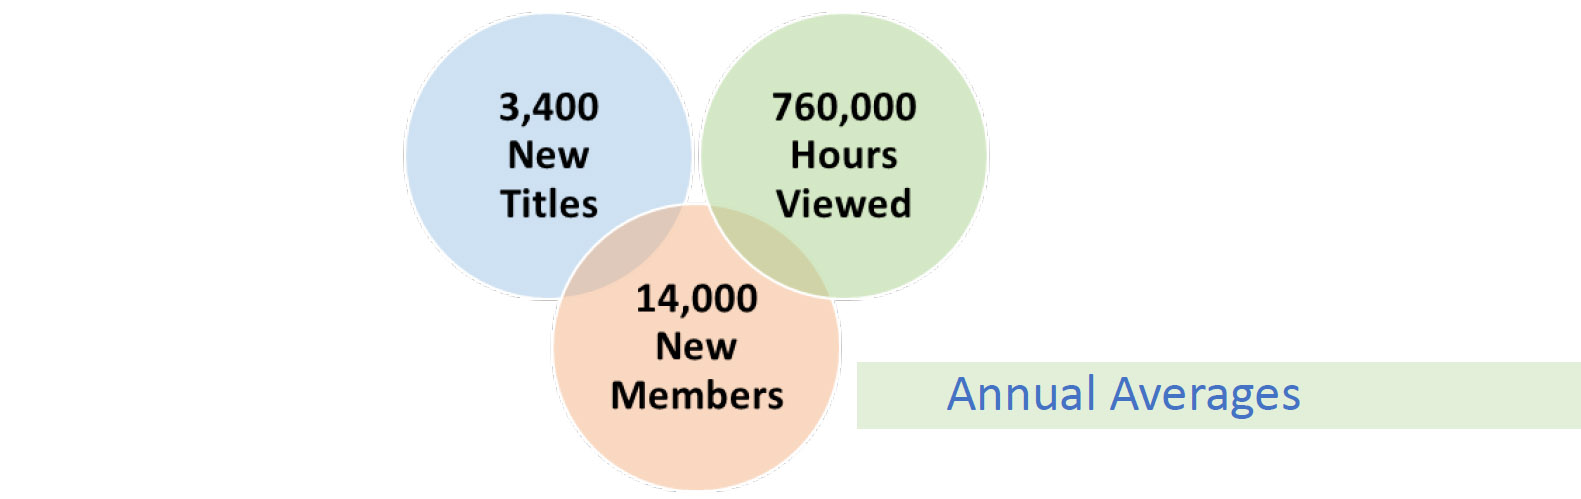 A chart shows three circles with these figures: Annual Averages: 3,400 new titles; 760,000 hours viewed; 14,000 new members.